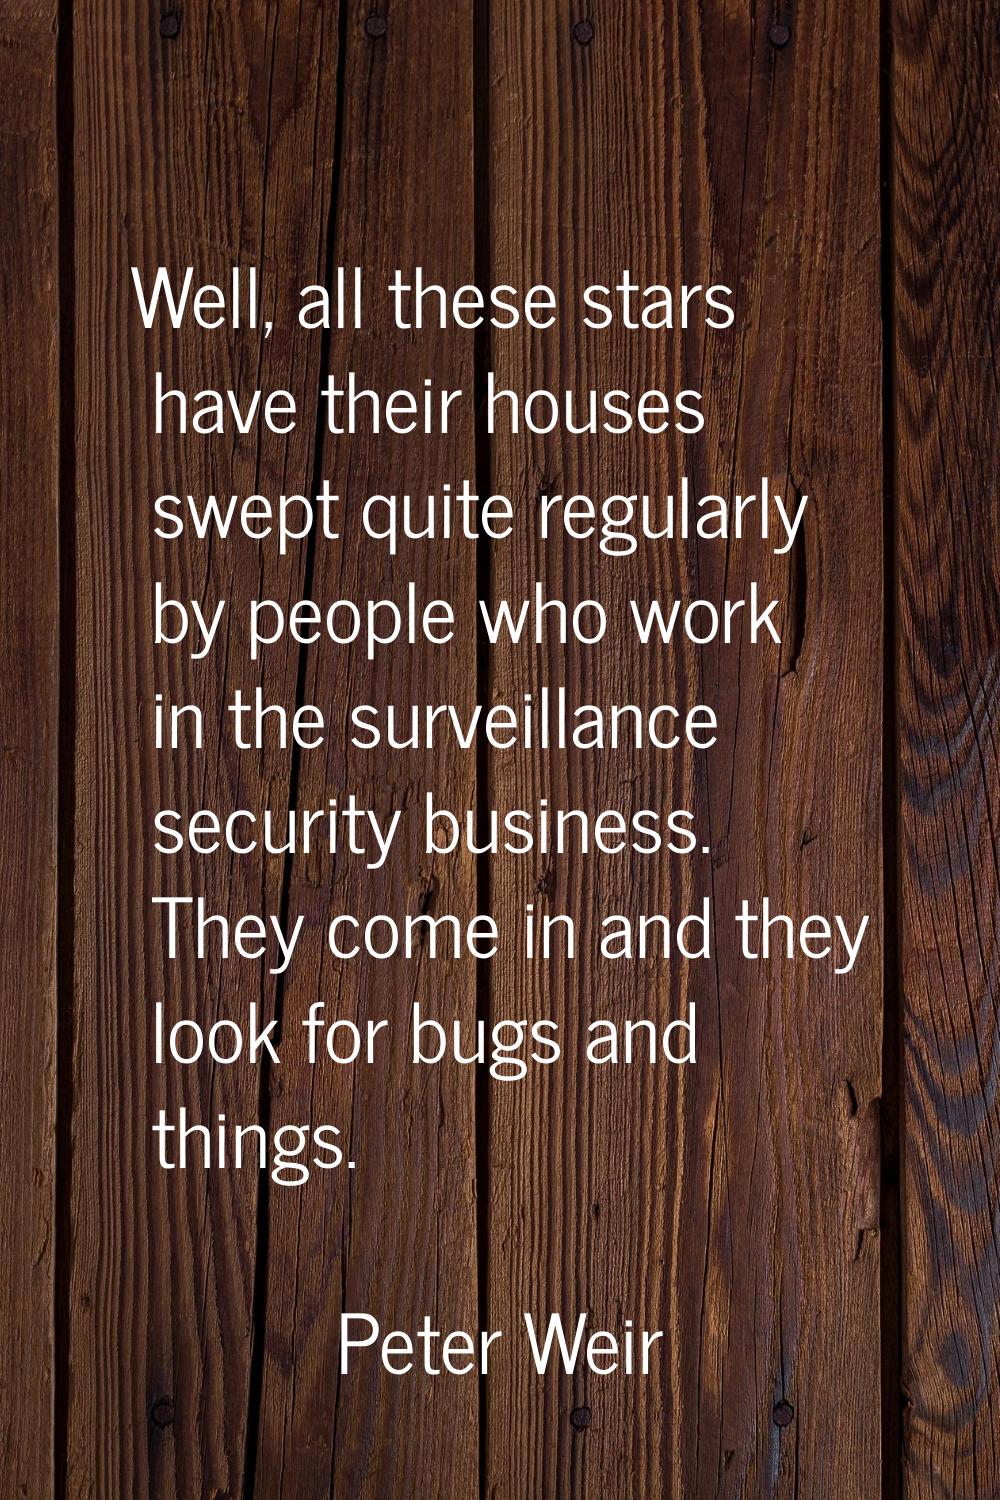 Well, all these stars have their houses swept quite regularly by people who work in the surveillanc